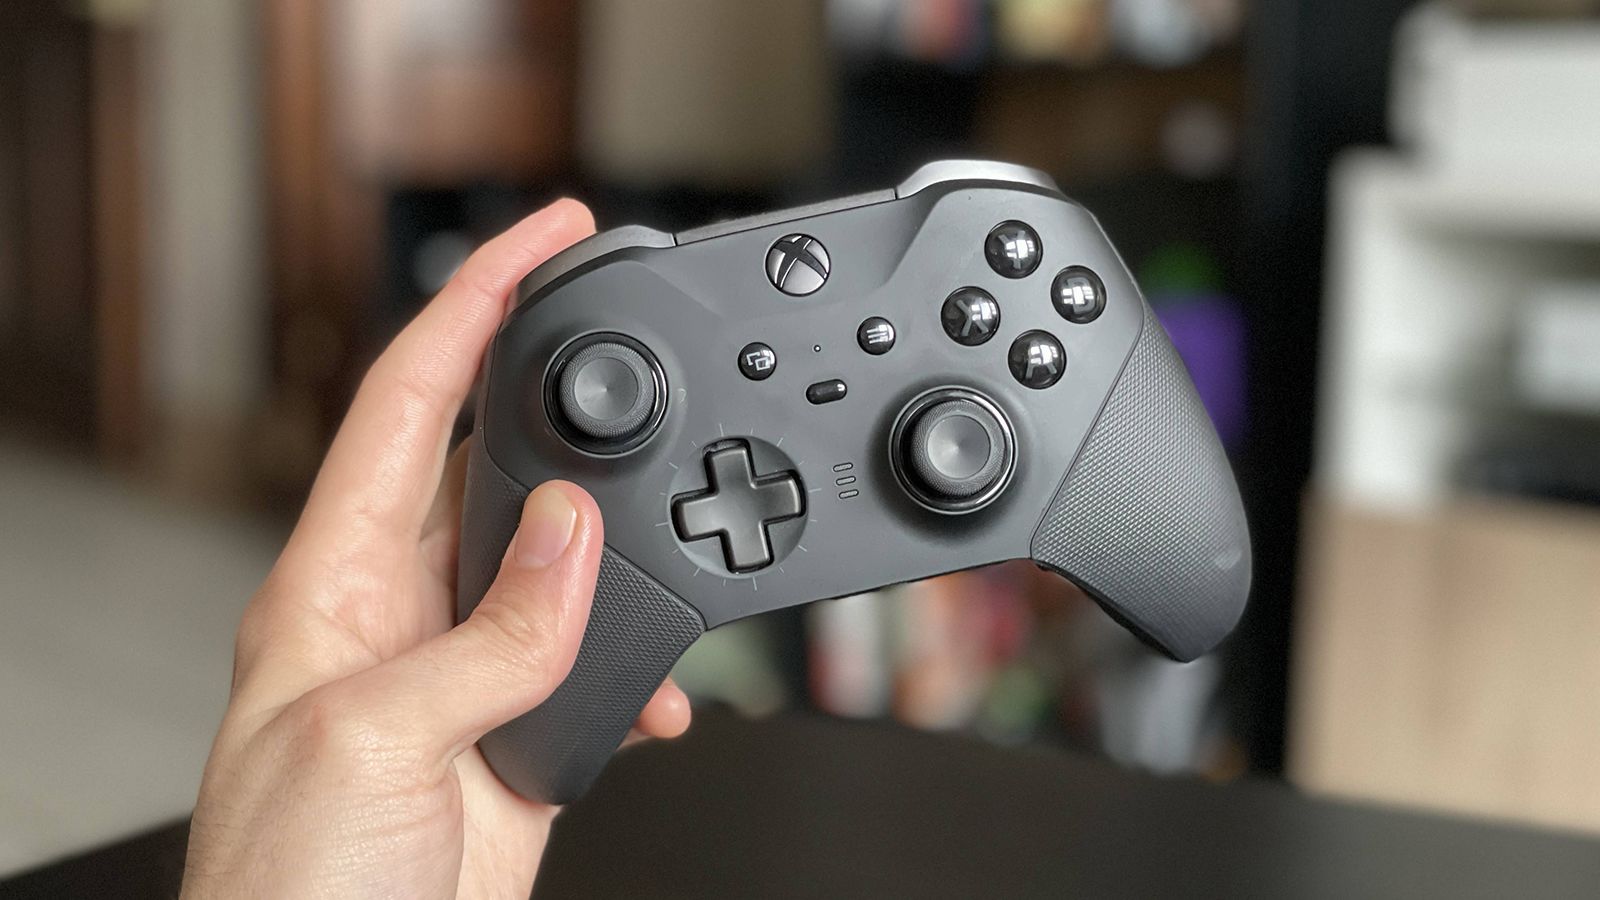 Are expensive Pro controllers like the Xbox Elite Series 2 really